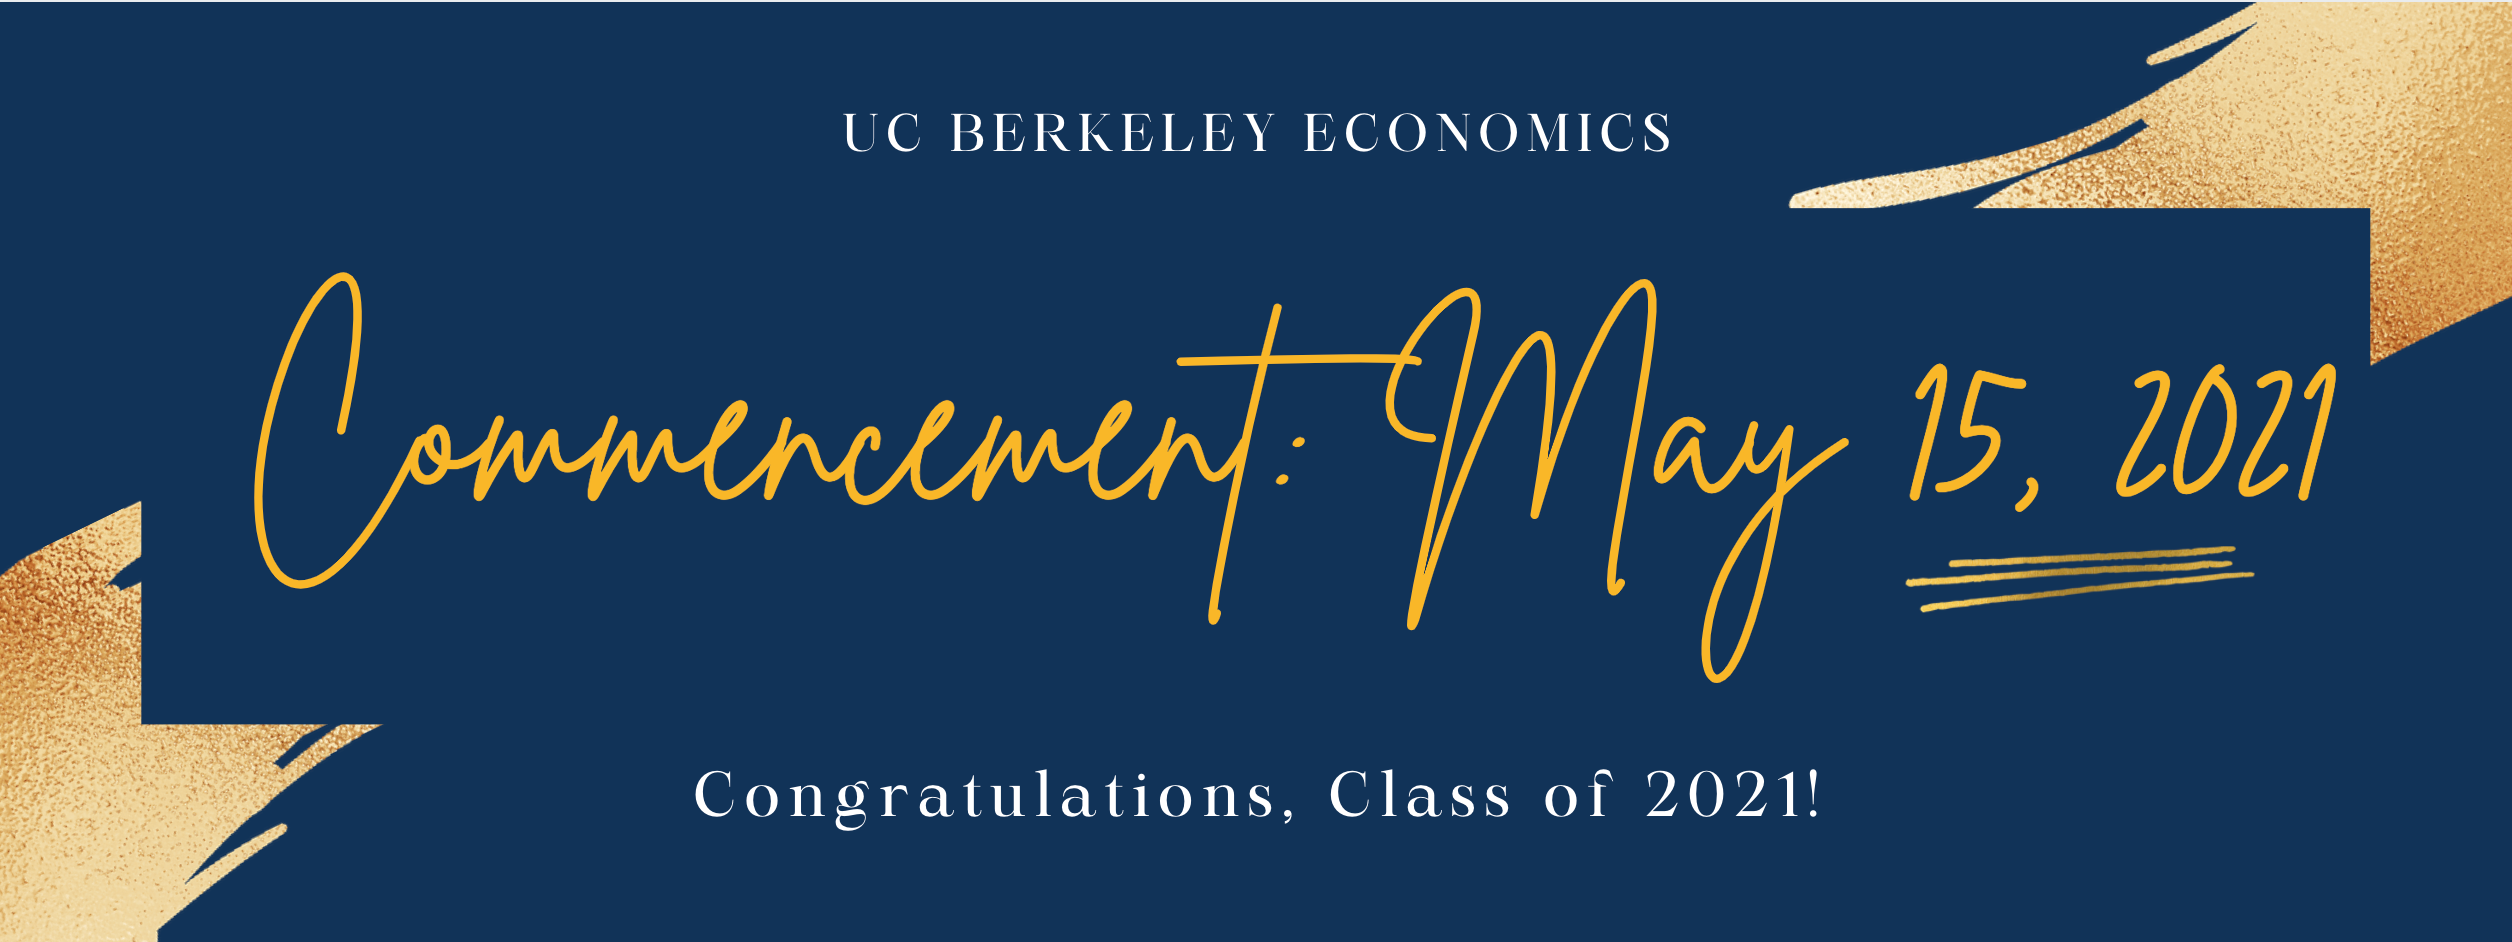 Commencement 2021 Banner